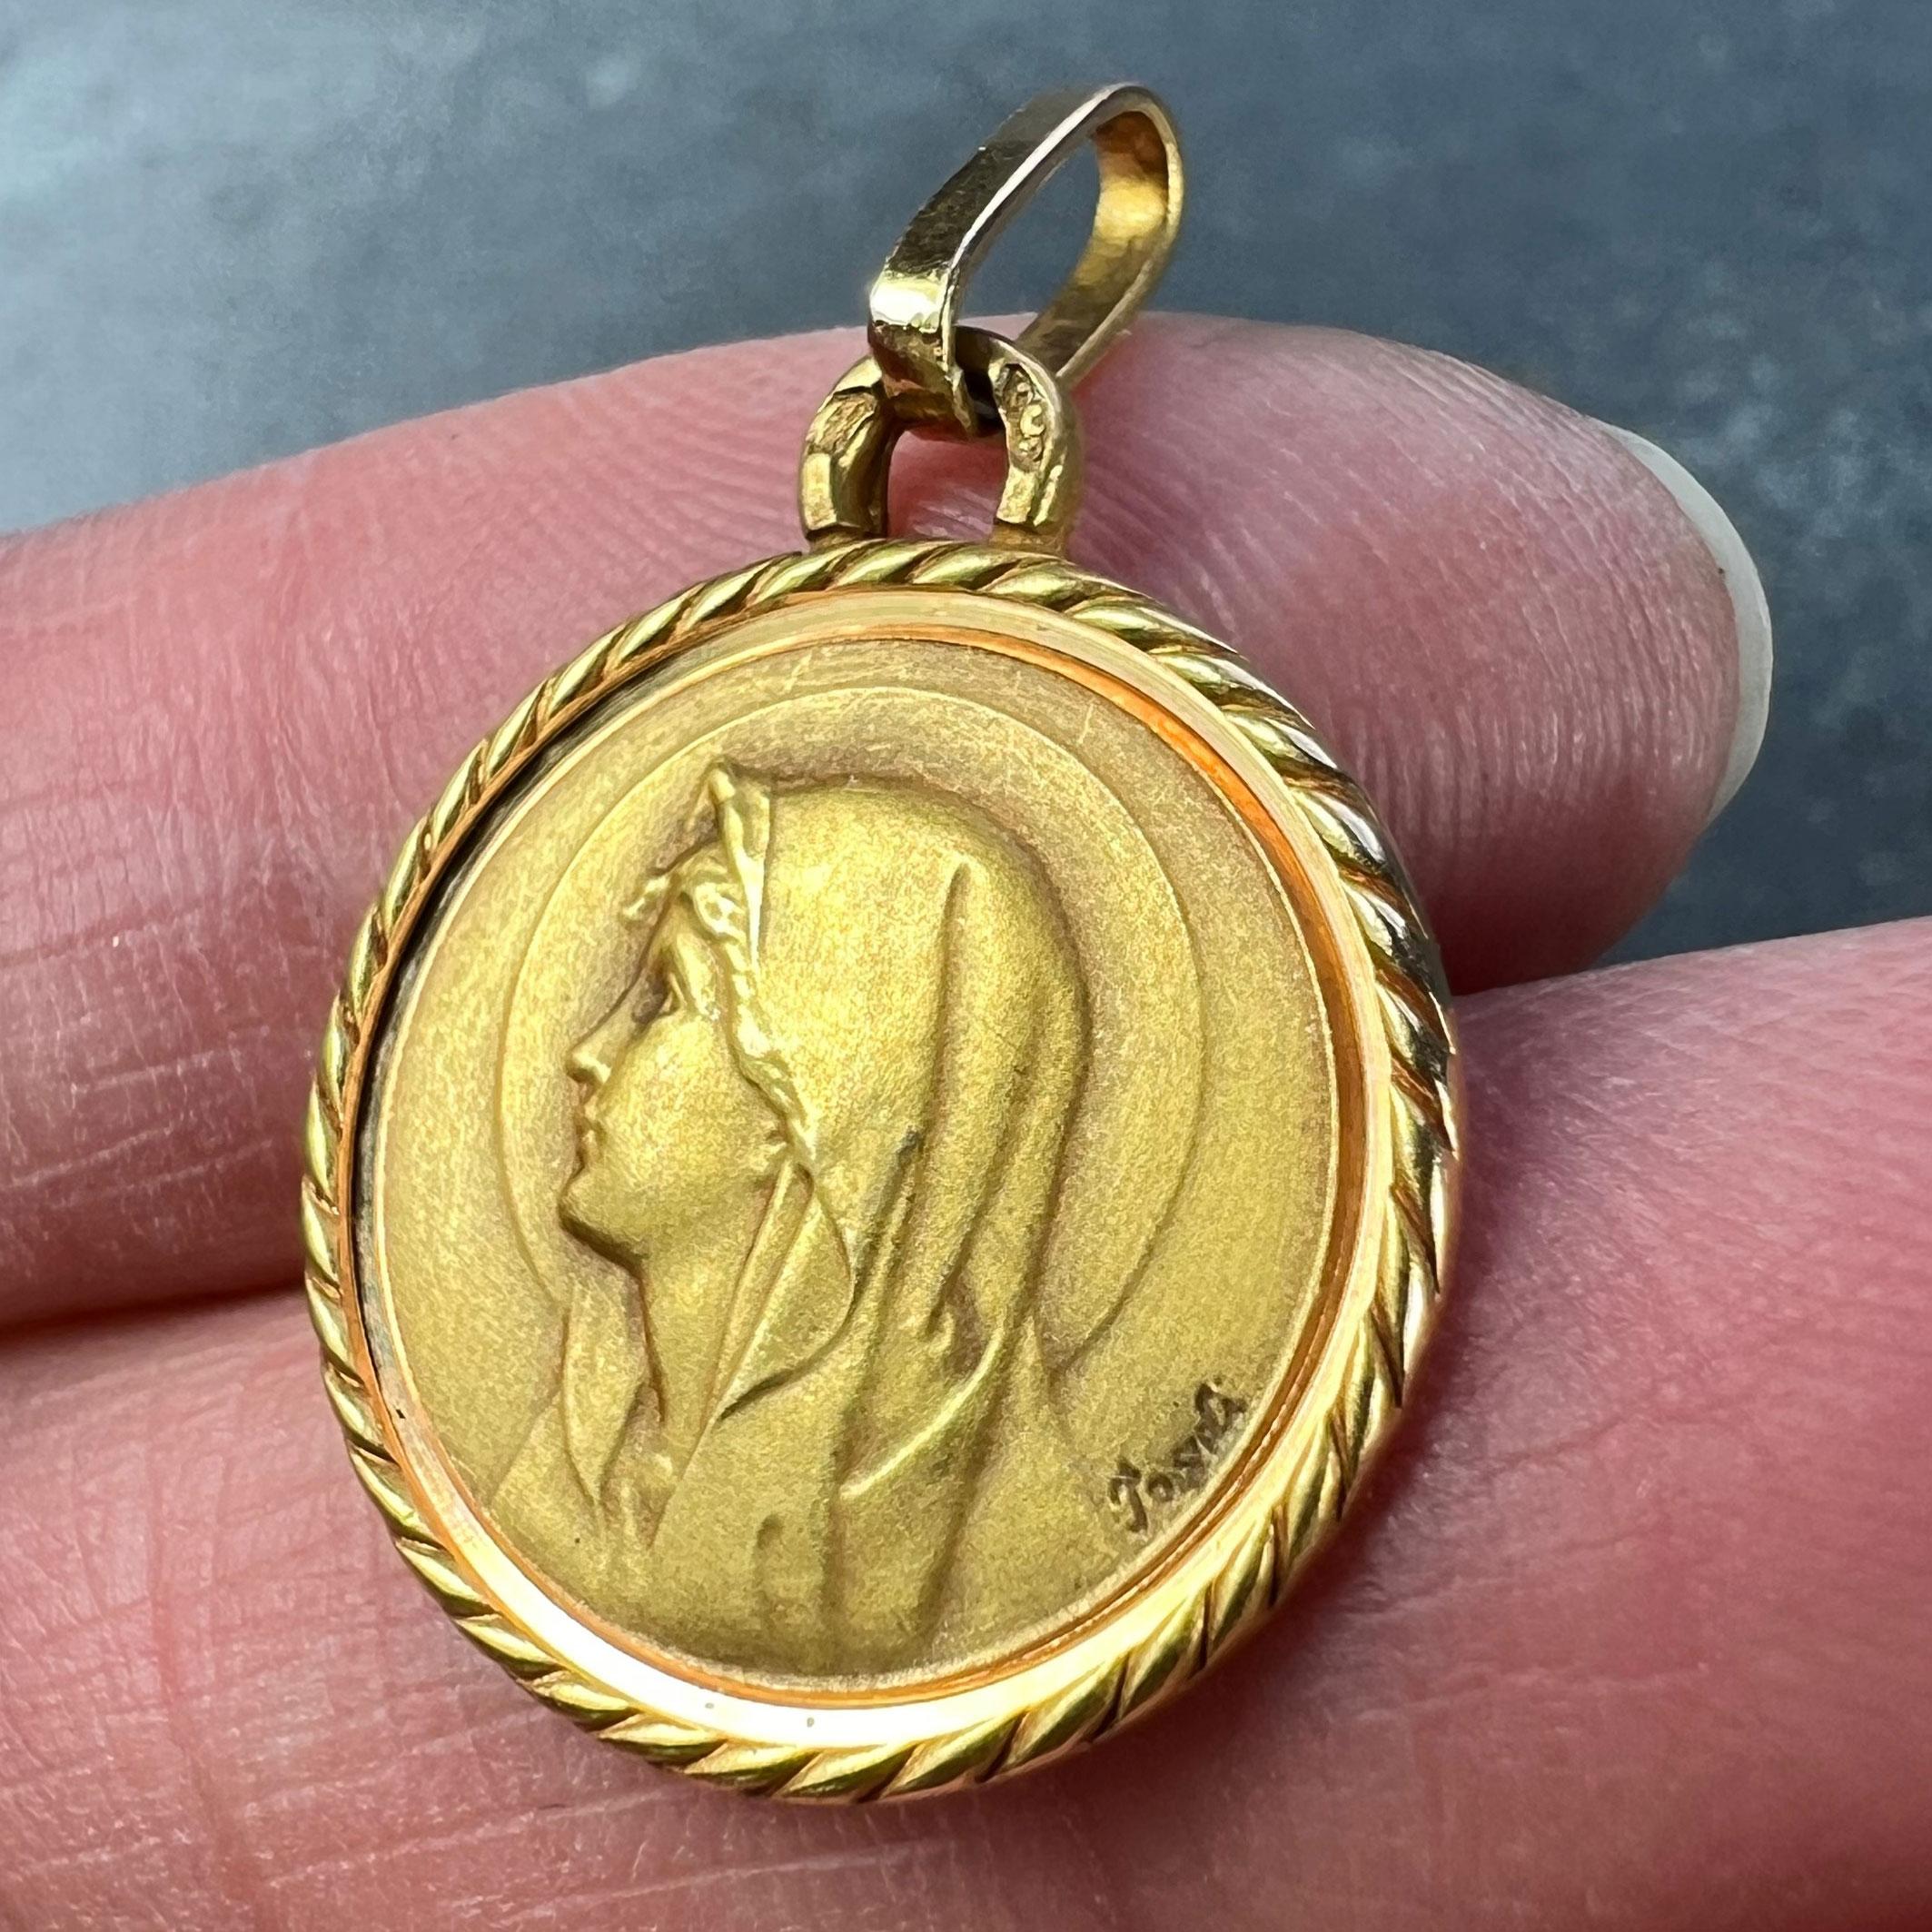 French Perroud Pagdi 18K Yellow Gold Virgin Mary Medal Pendant For Sale 2